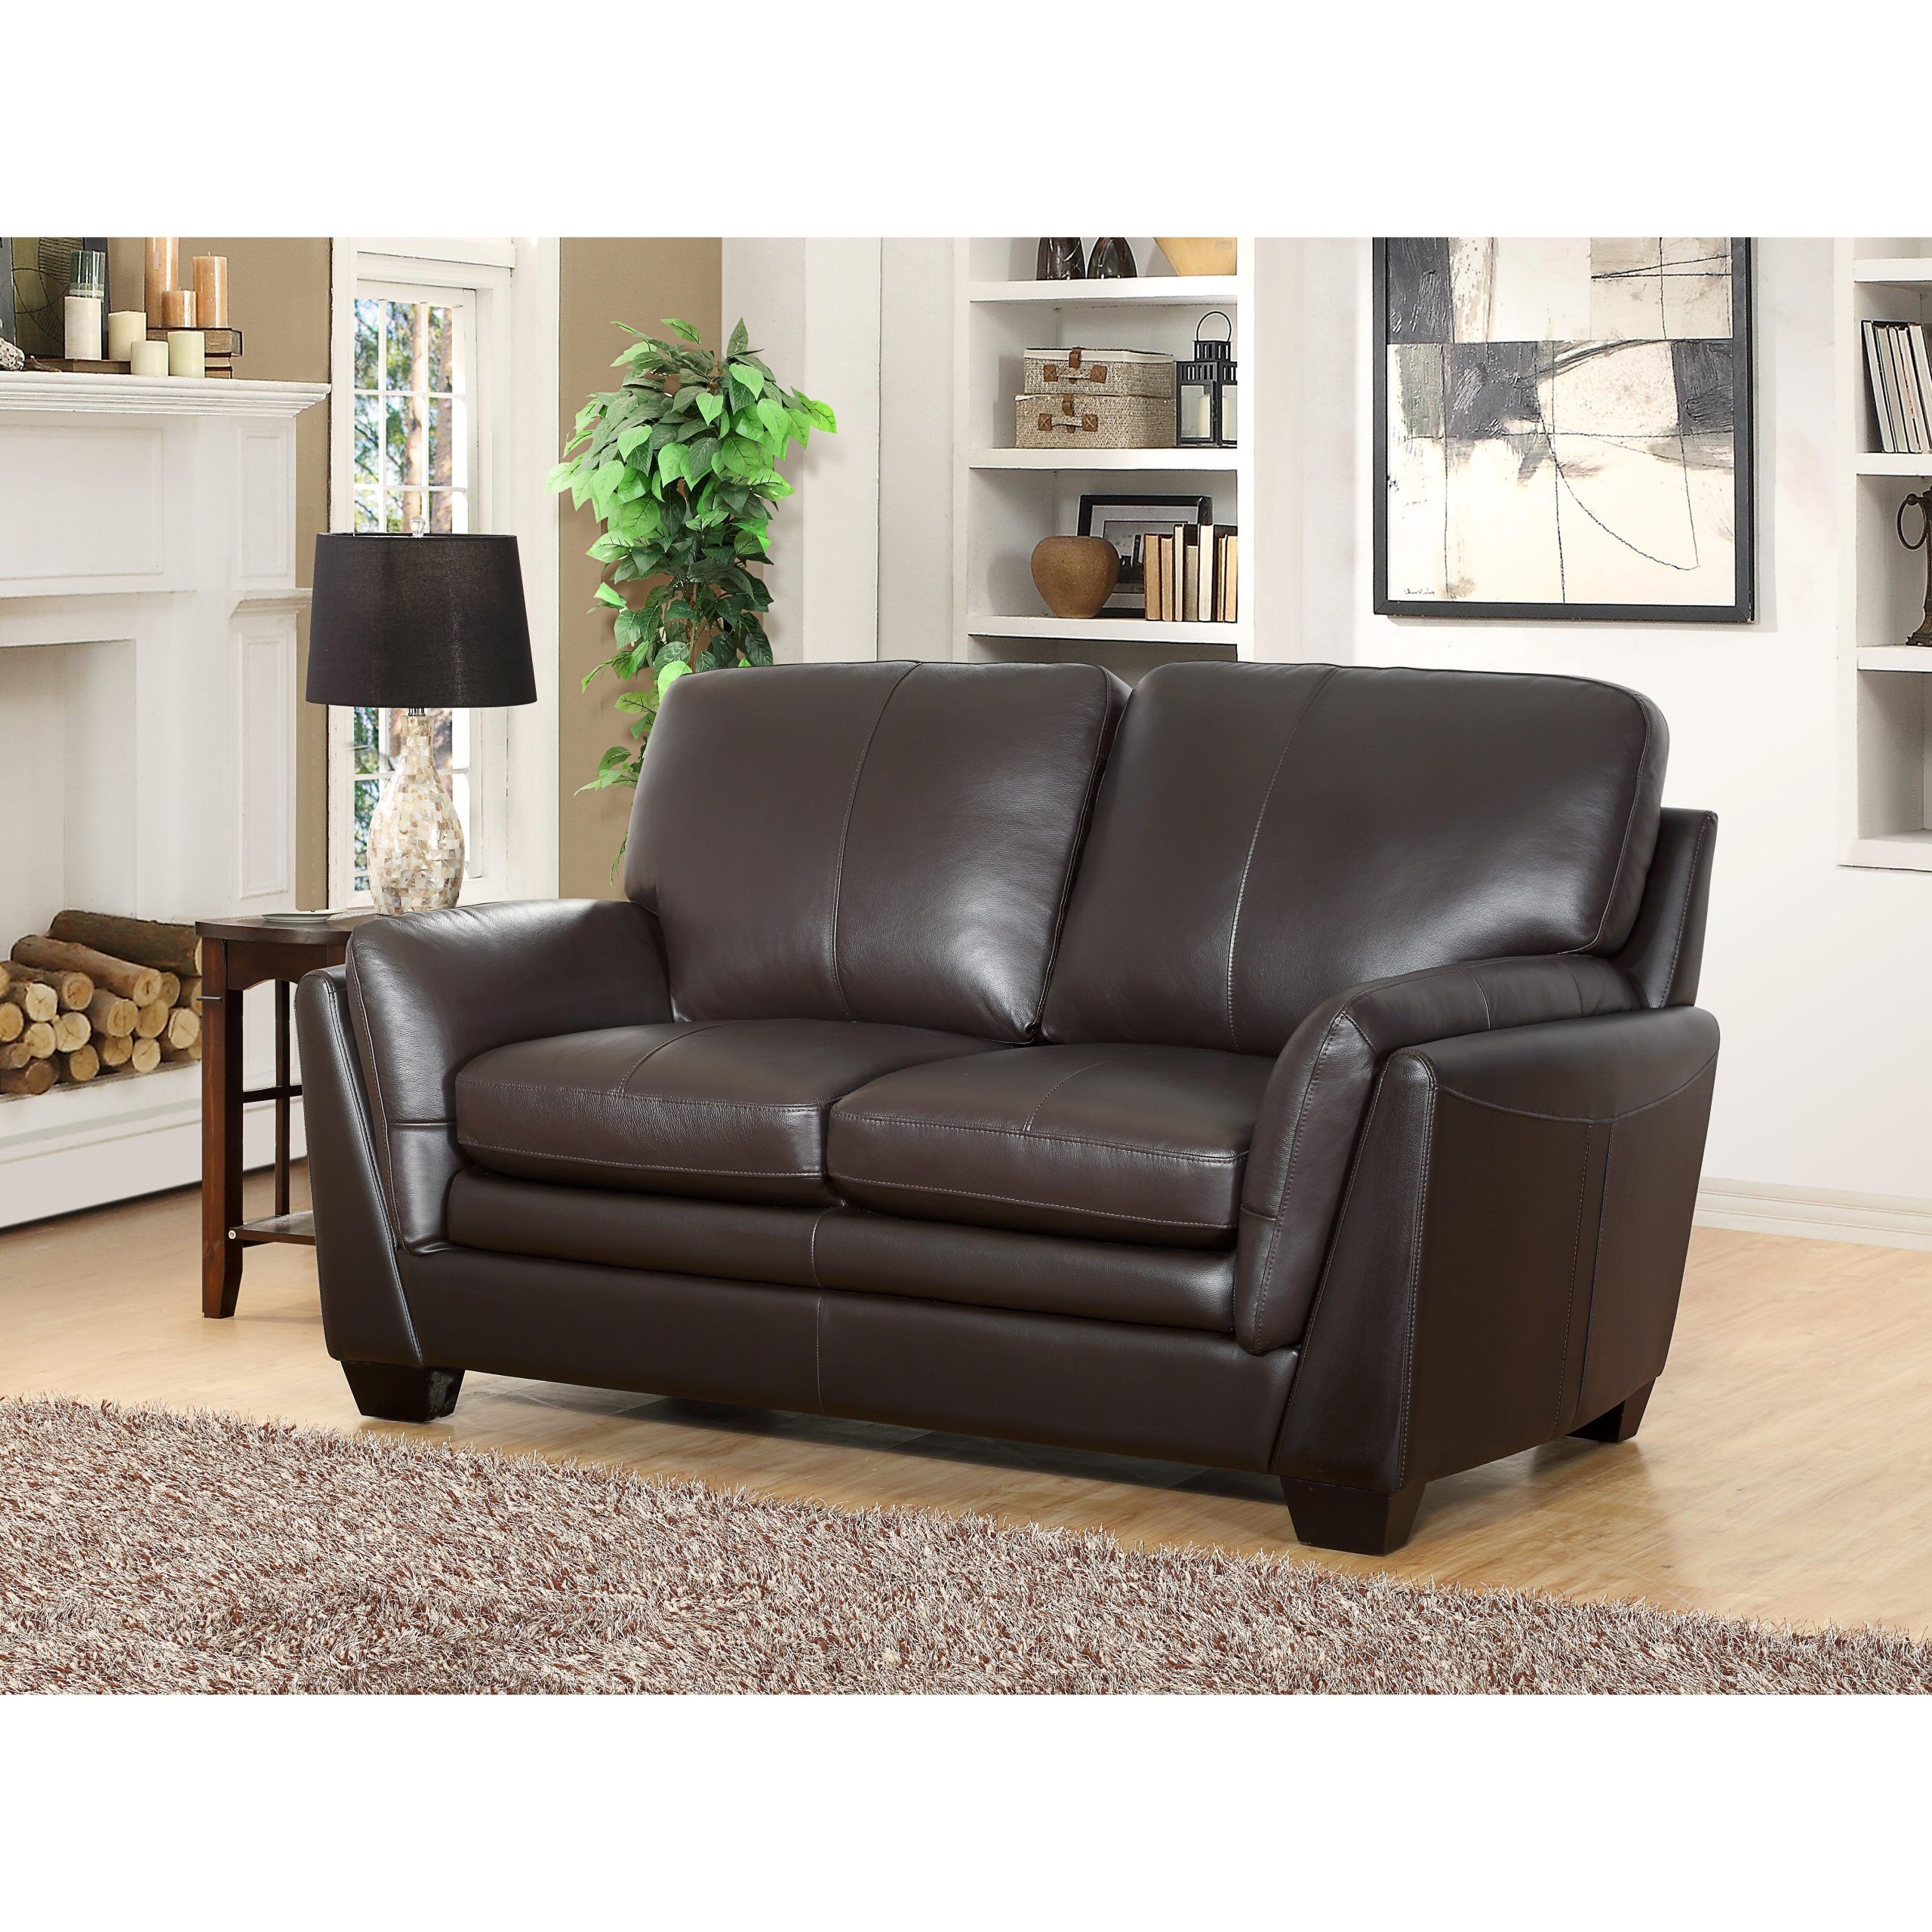 Darby Home Co Whitstran Top Grain Leather Sofa And Loveseat Set | Wayfair Regarding Top Grain Leather Loveseats (Gallery 20 of 20)